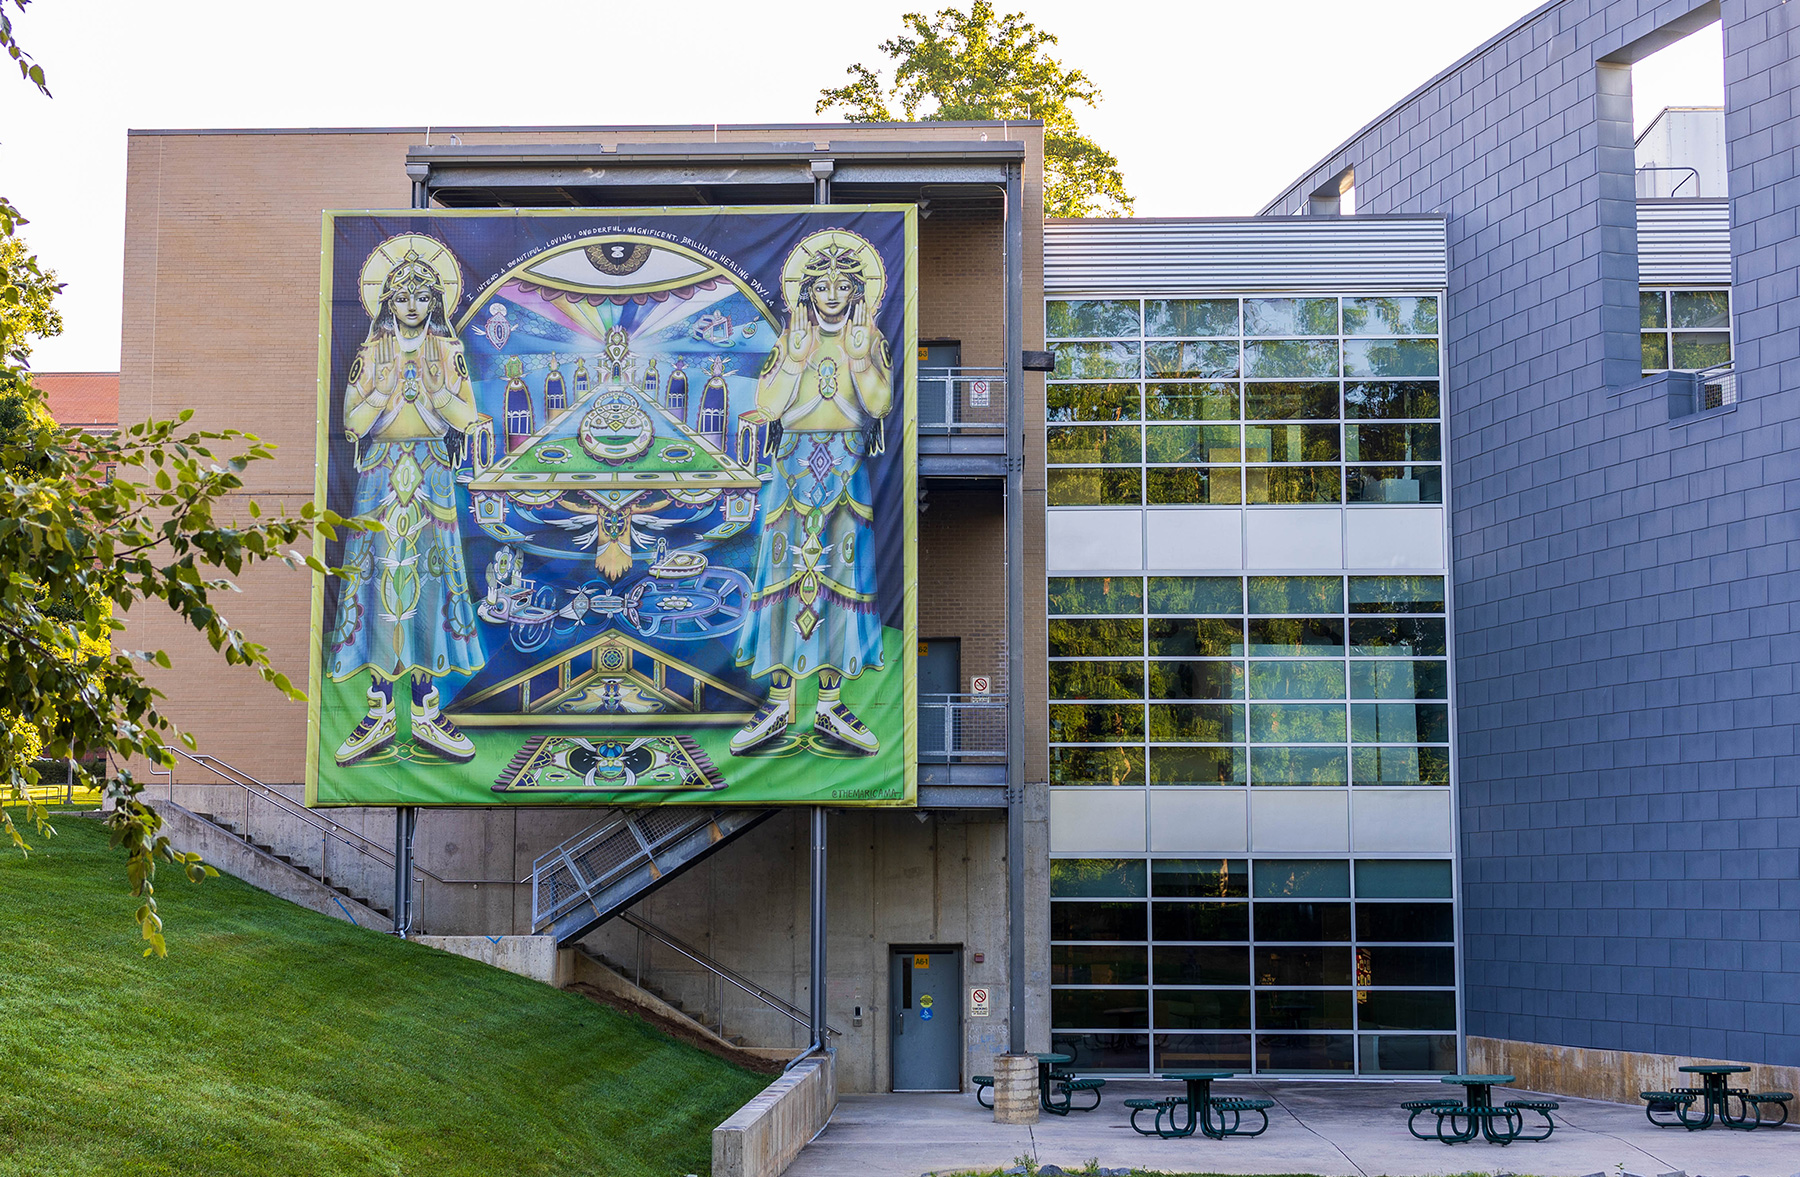 Aricama Portal, mural on mesh fabric, 2018, by visiting artist, Maricama (Maria Camia), New York, installed on the west side of the Art and Design building.